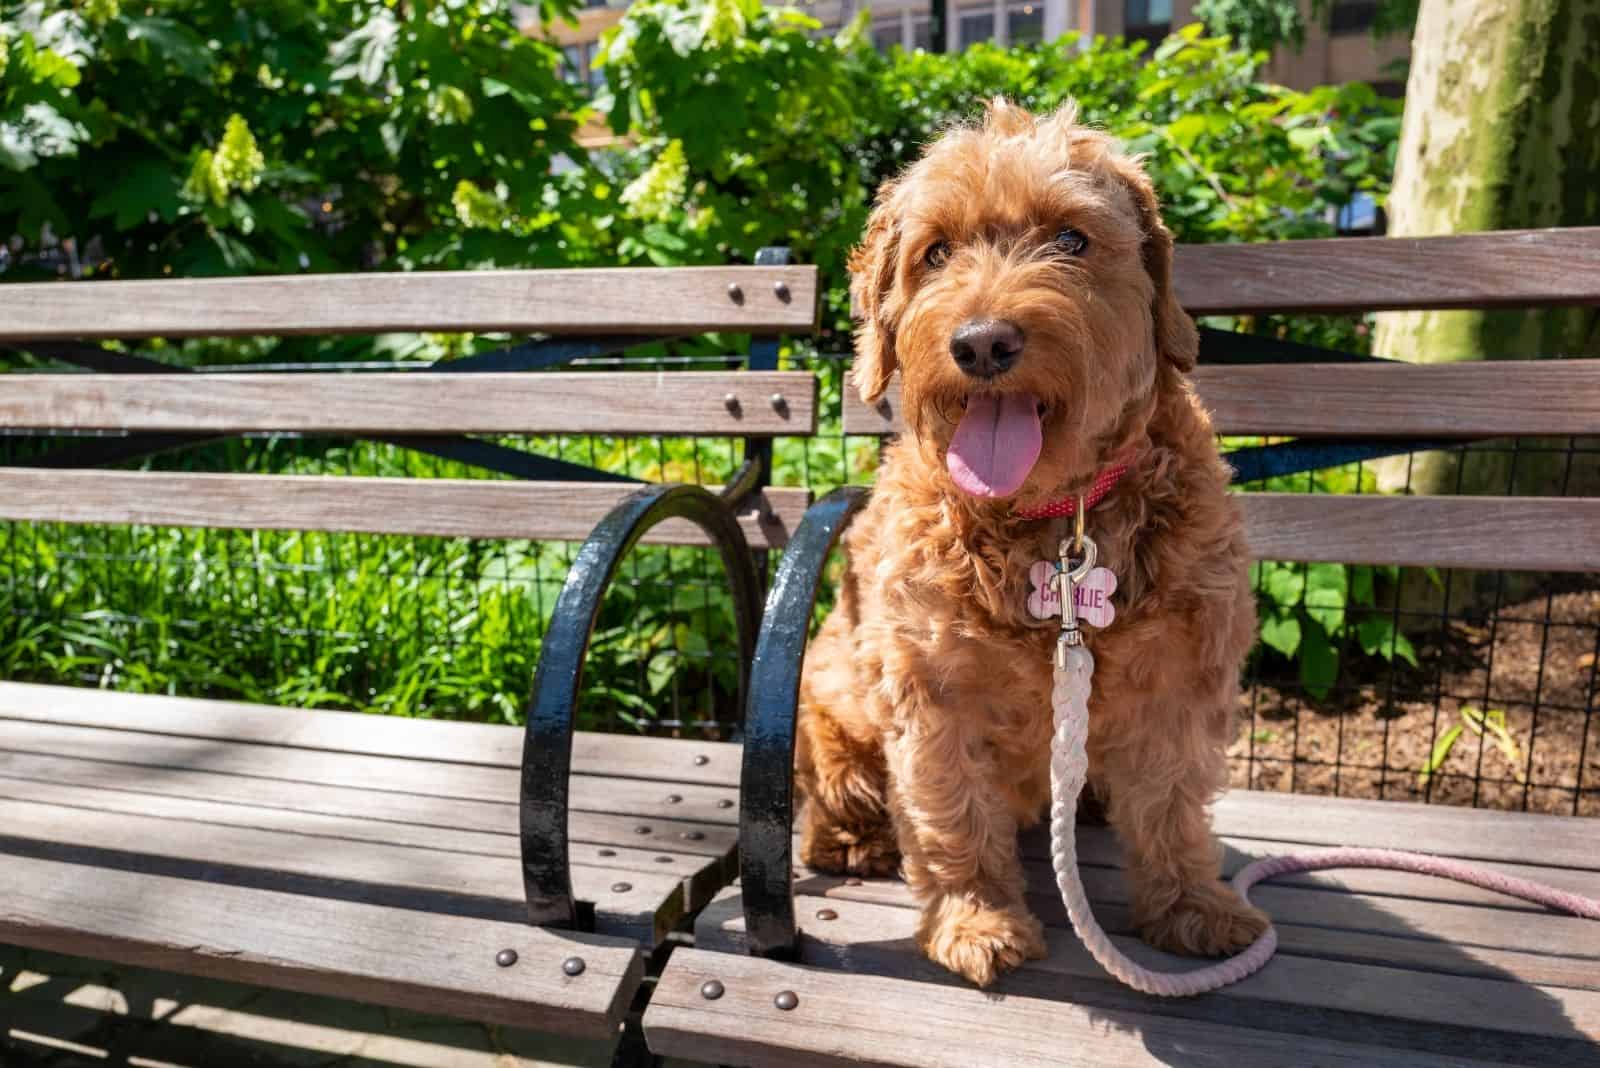 F1 Miniature Goldendoodle sitting on the bench outdoors with a leash around its neck